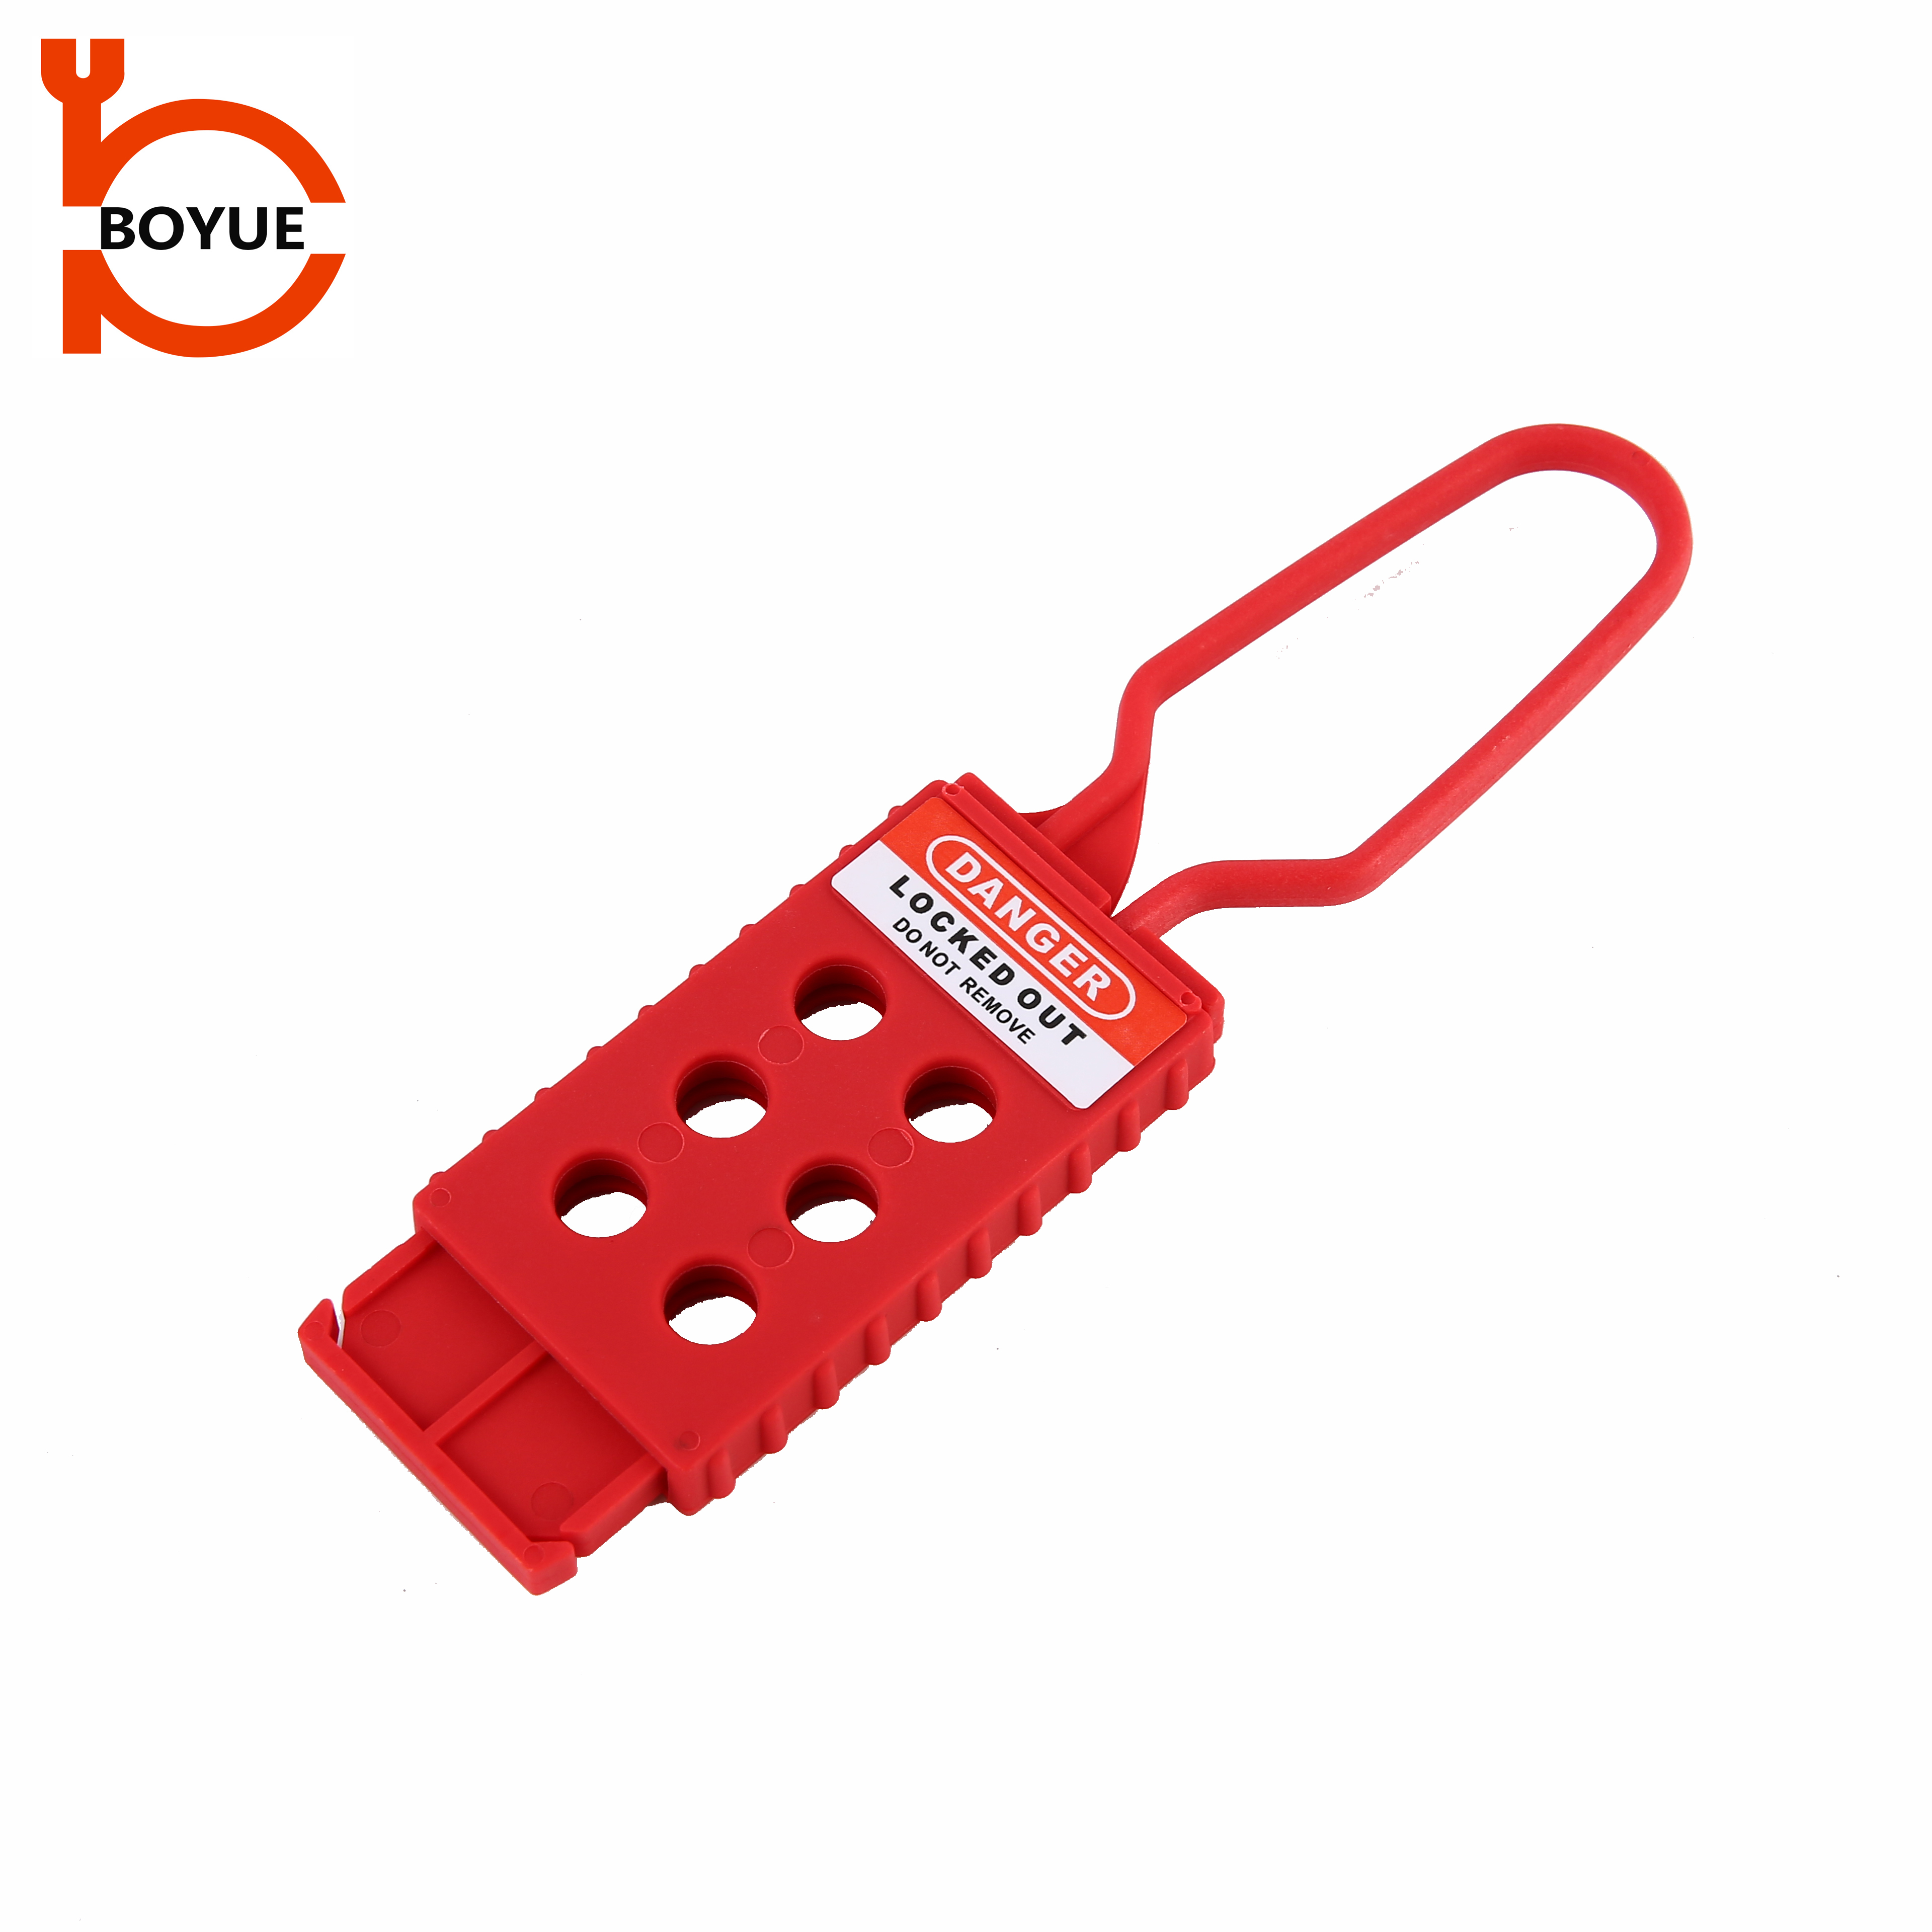 High Quality Insulated Shackle Nylon Lockout Tagout Hasp Lock HN-01